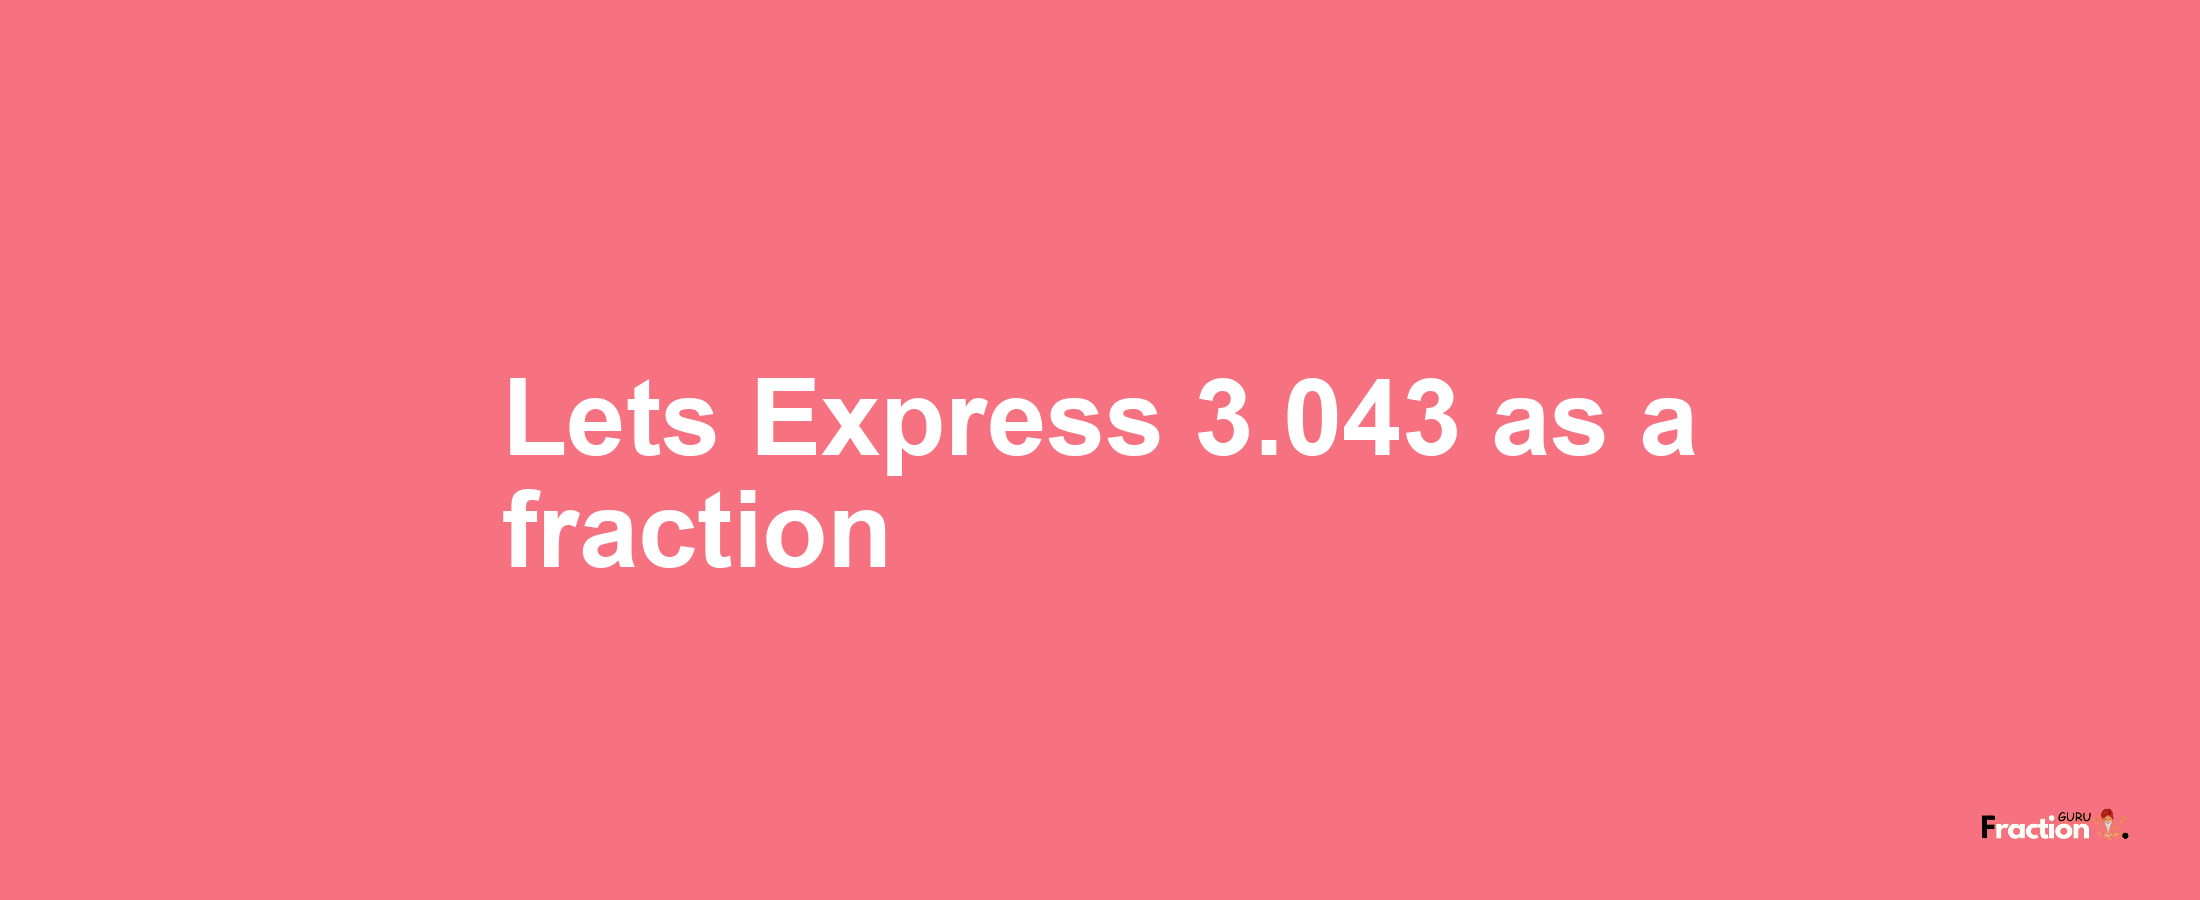 Lets Express 3.043 as afraction